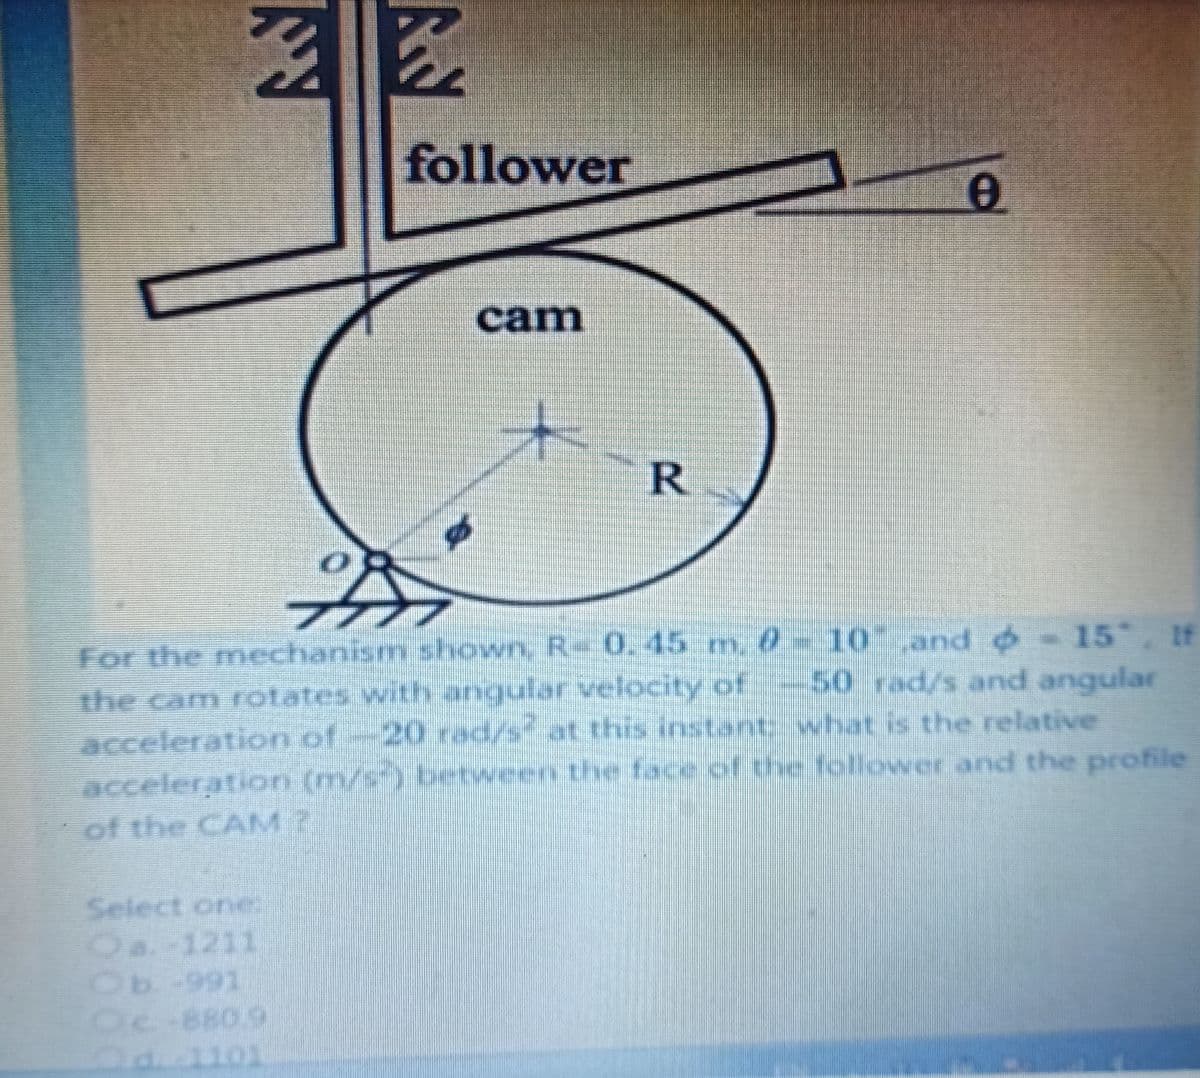 follower
cam
R.
15 , If
For the nm
echanism shownn, R 0.45 m, 0= 10 and o
50 rad/s and angular
the cam rotates with angular velocity of
acceleration of-20 rad/s at this instant what is the relative
acceleration (m/s-) between the face of the follower and the profile
of the CAM?
Select one
Oa.-1211
-991
Oc-880.9
